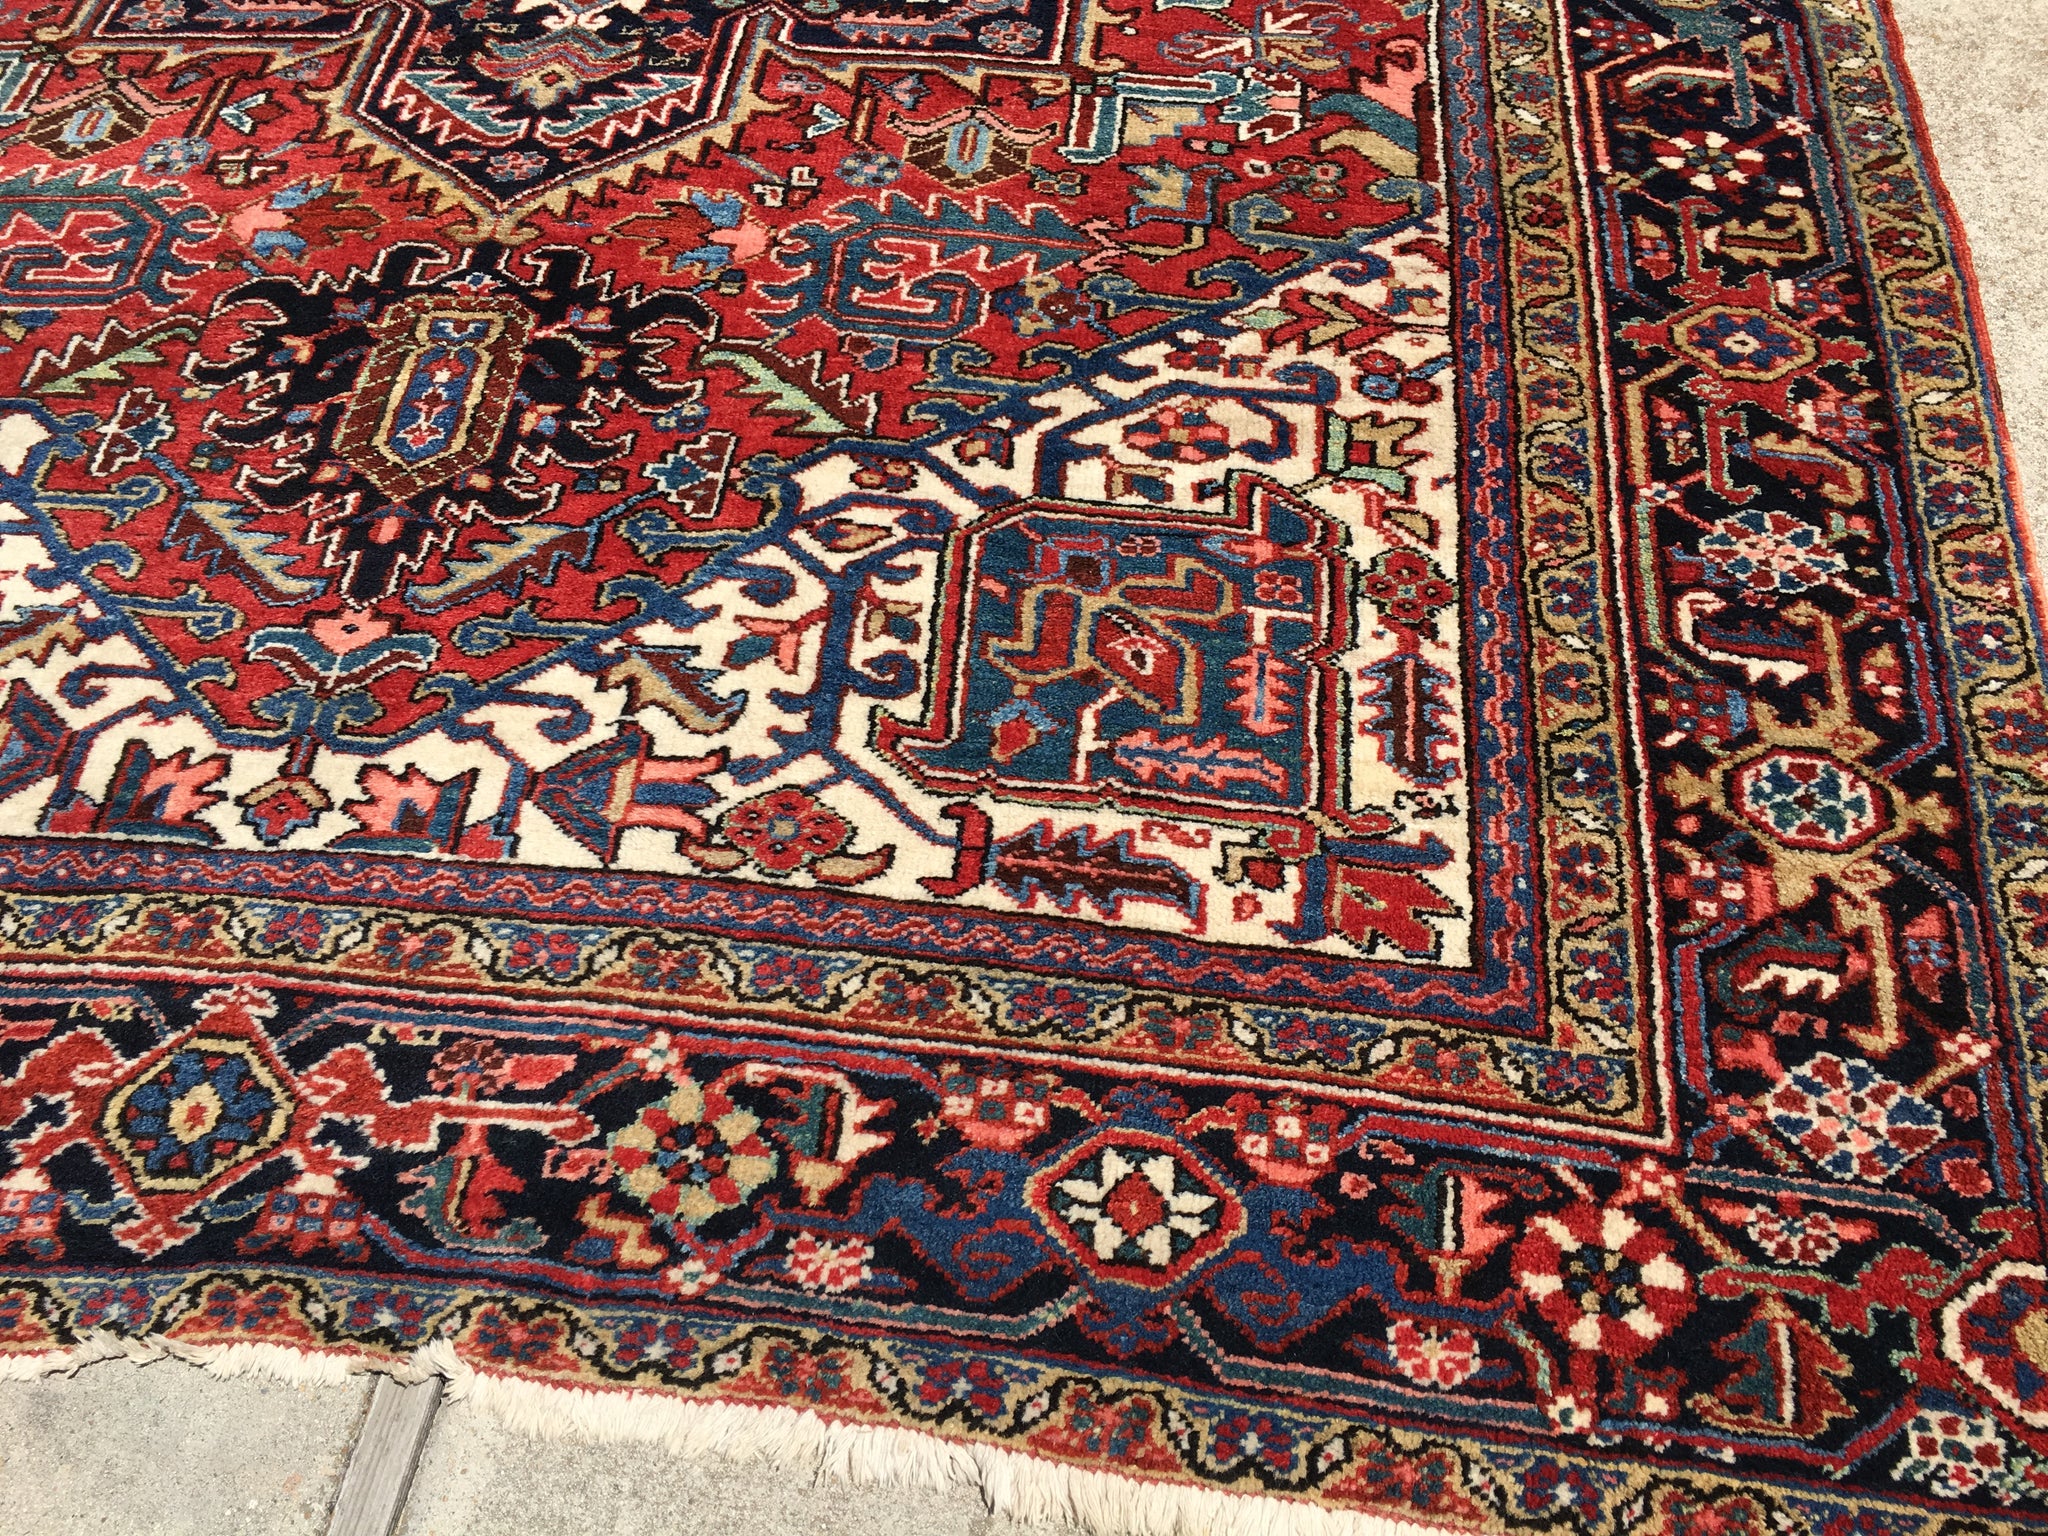 Why Did My Old Antique Persian Rug Lose Value? - Behnam Rugs